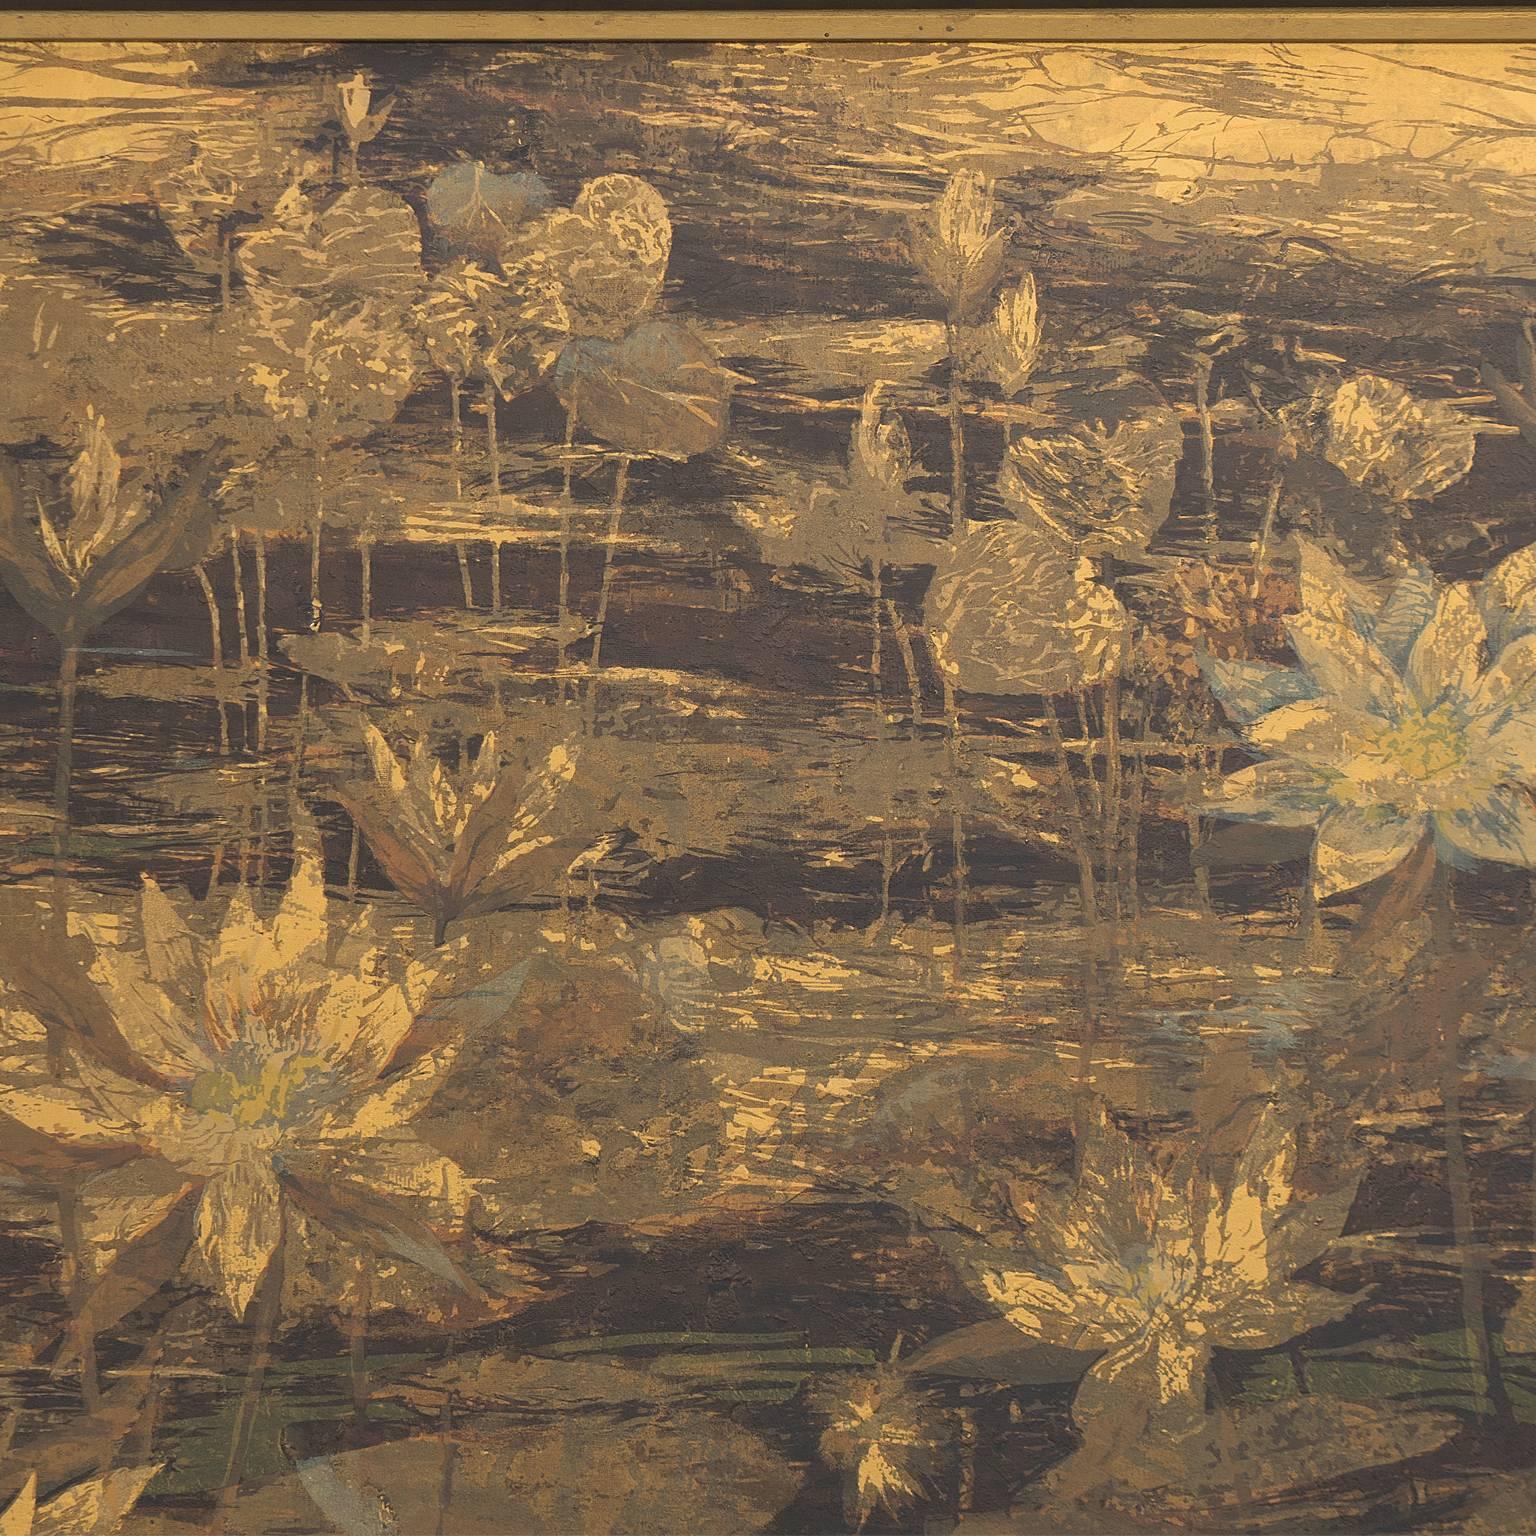 Large Framed Art Botanical Serigraph Water Lillies in Metallic Gold For Sale 1